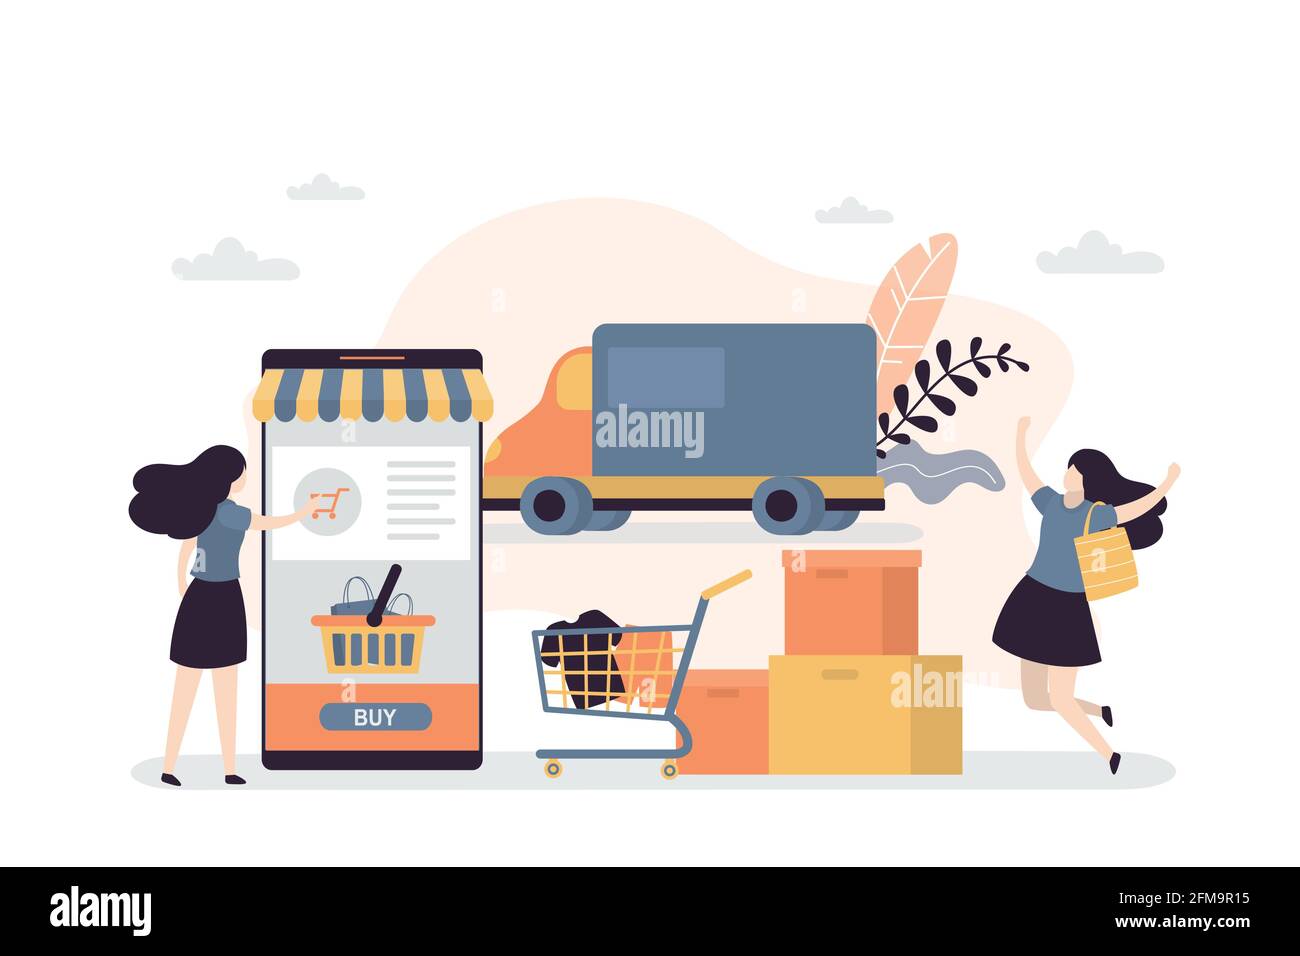 Delivery of goods from online store. Female character ordering and buy products in mobile app. Truck delivers goods from online marketplace. Happy Wom Stock Vector